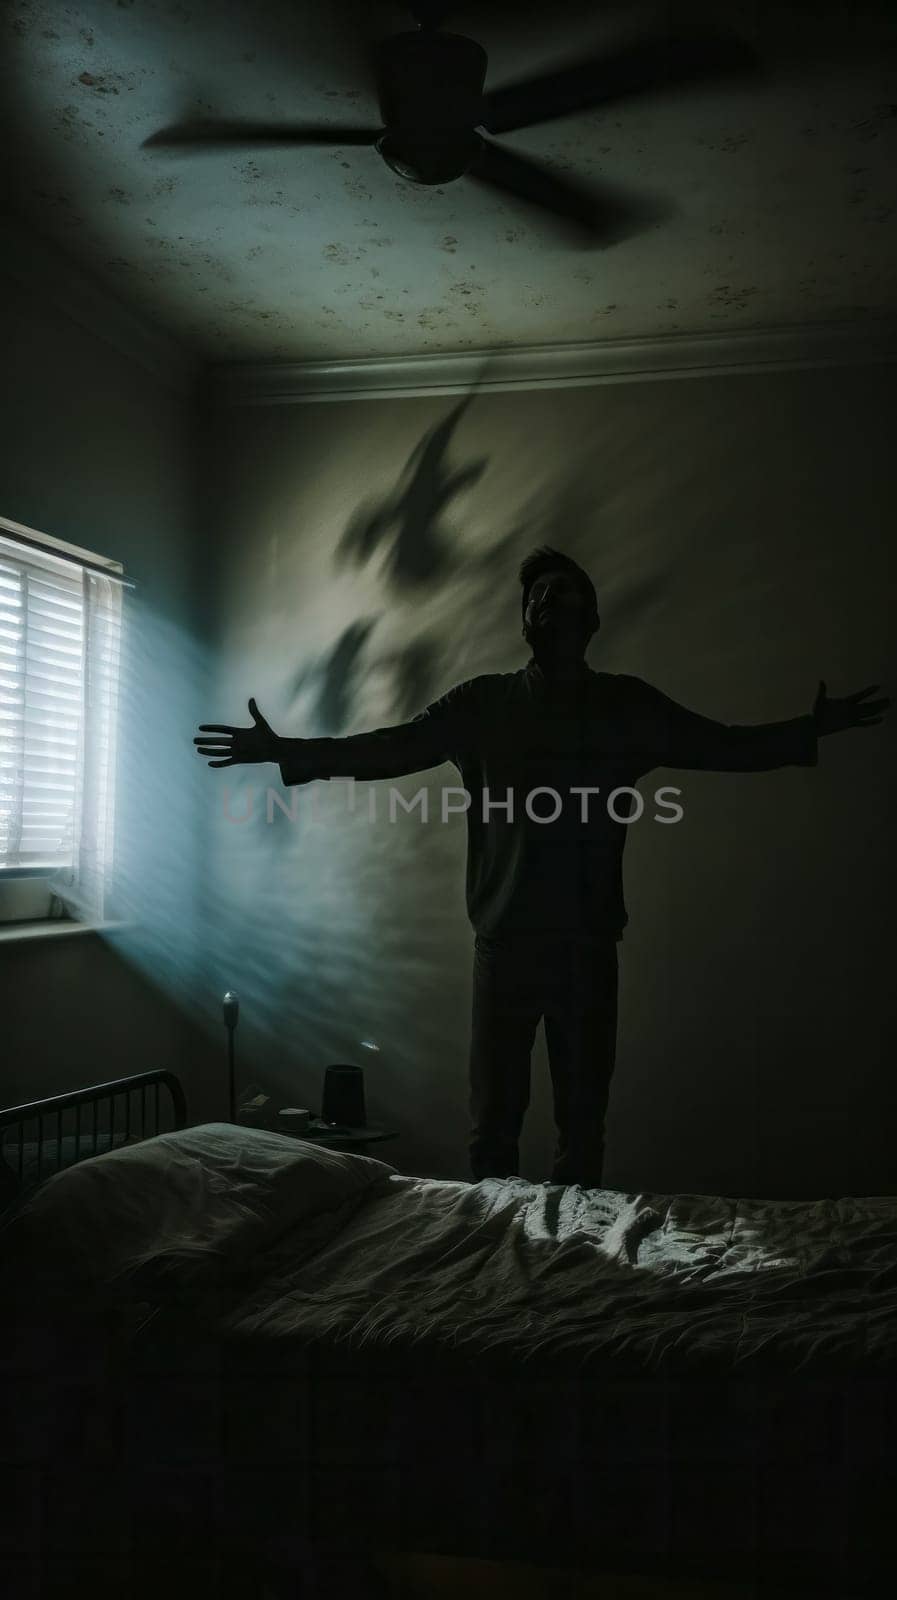 dramatic scene with a person standing on a bed, arms outstretched, in a dark room with shadows cast by a ceiling fan, creating a sense of restlessness or turmoil, insomnia or nightmares by Edophoto